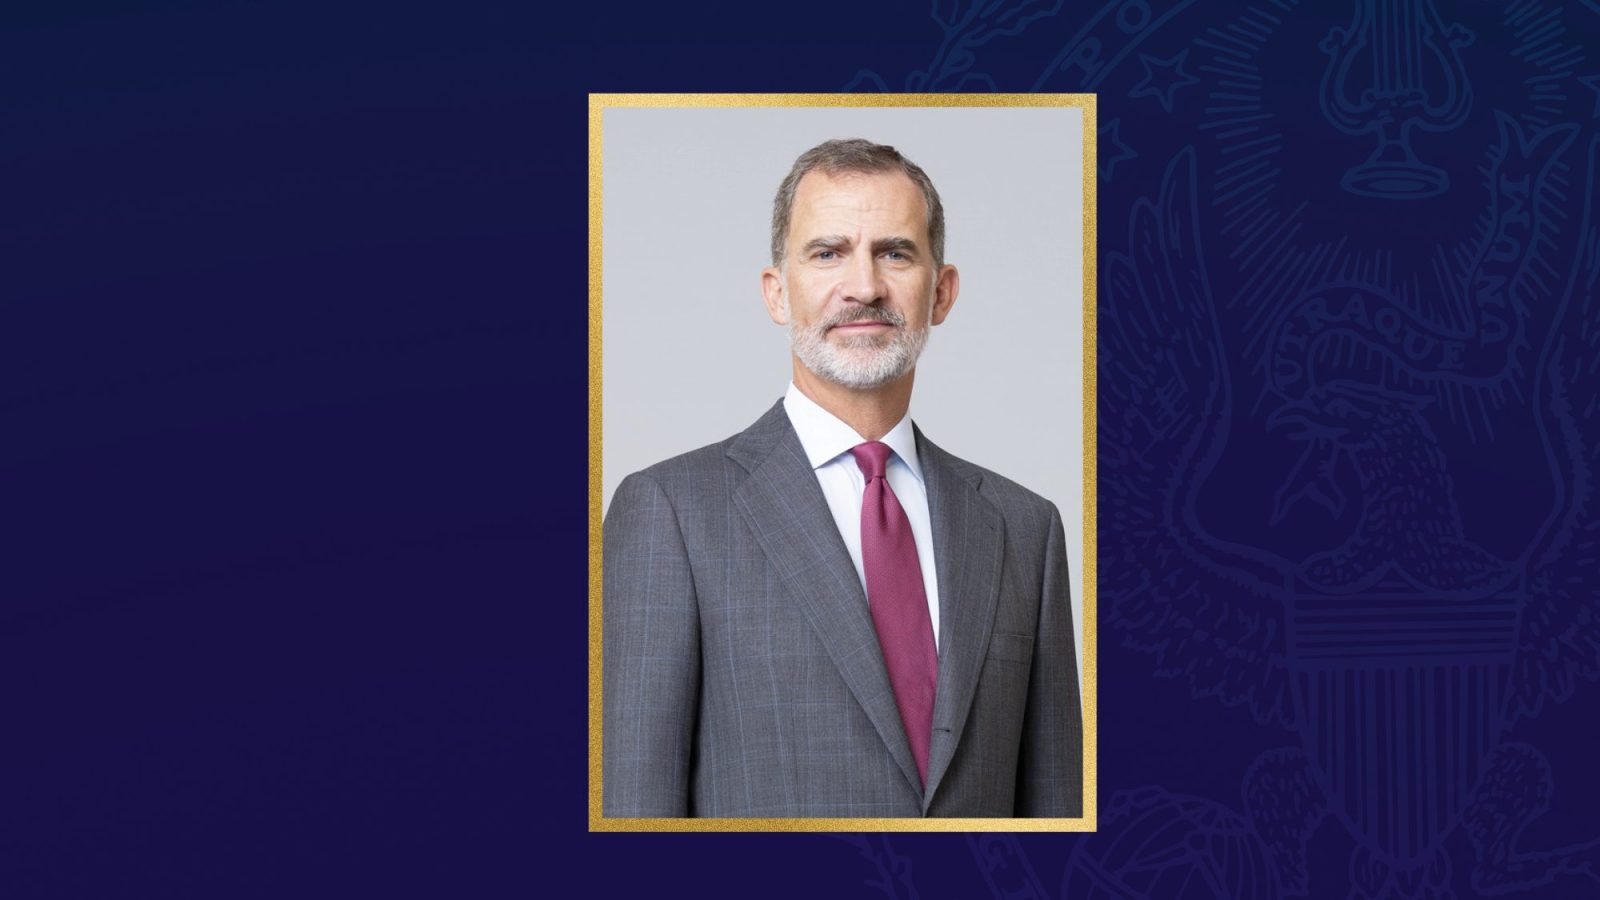 A headshot of King Felipe of Spain, who is wearing a gray suit and a burgundy tie, with a dark blue background behind his headshot.